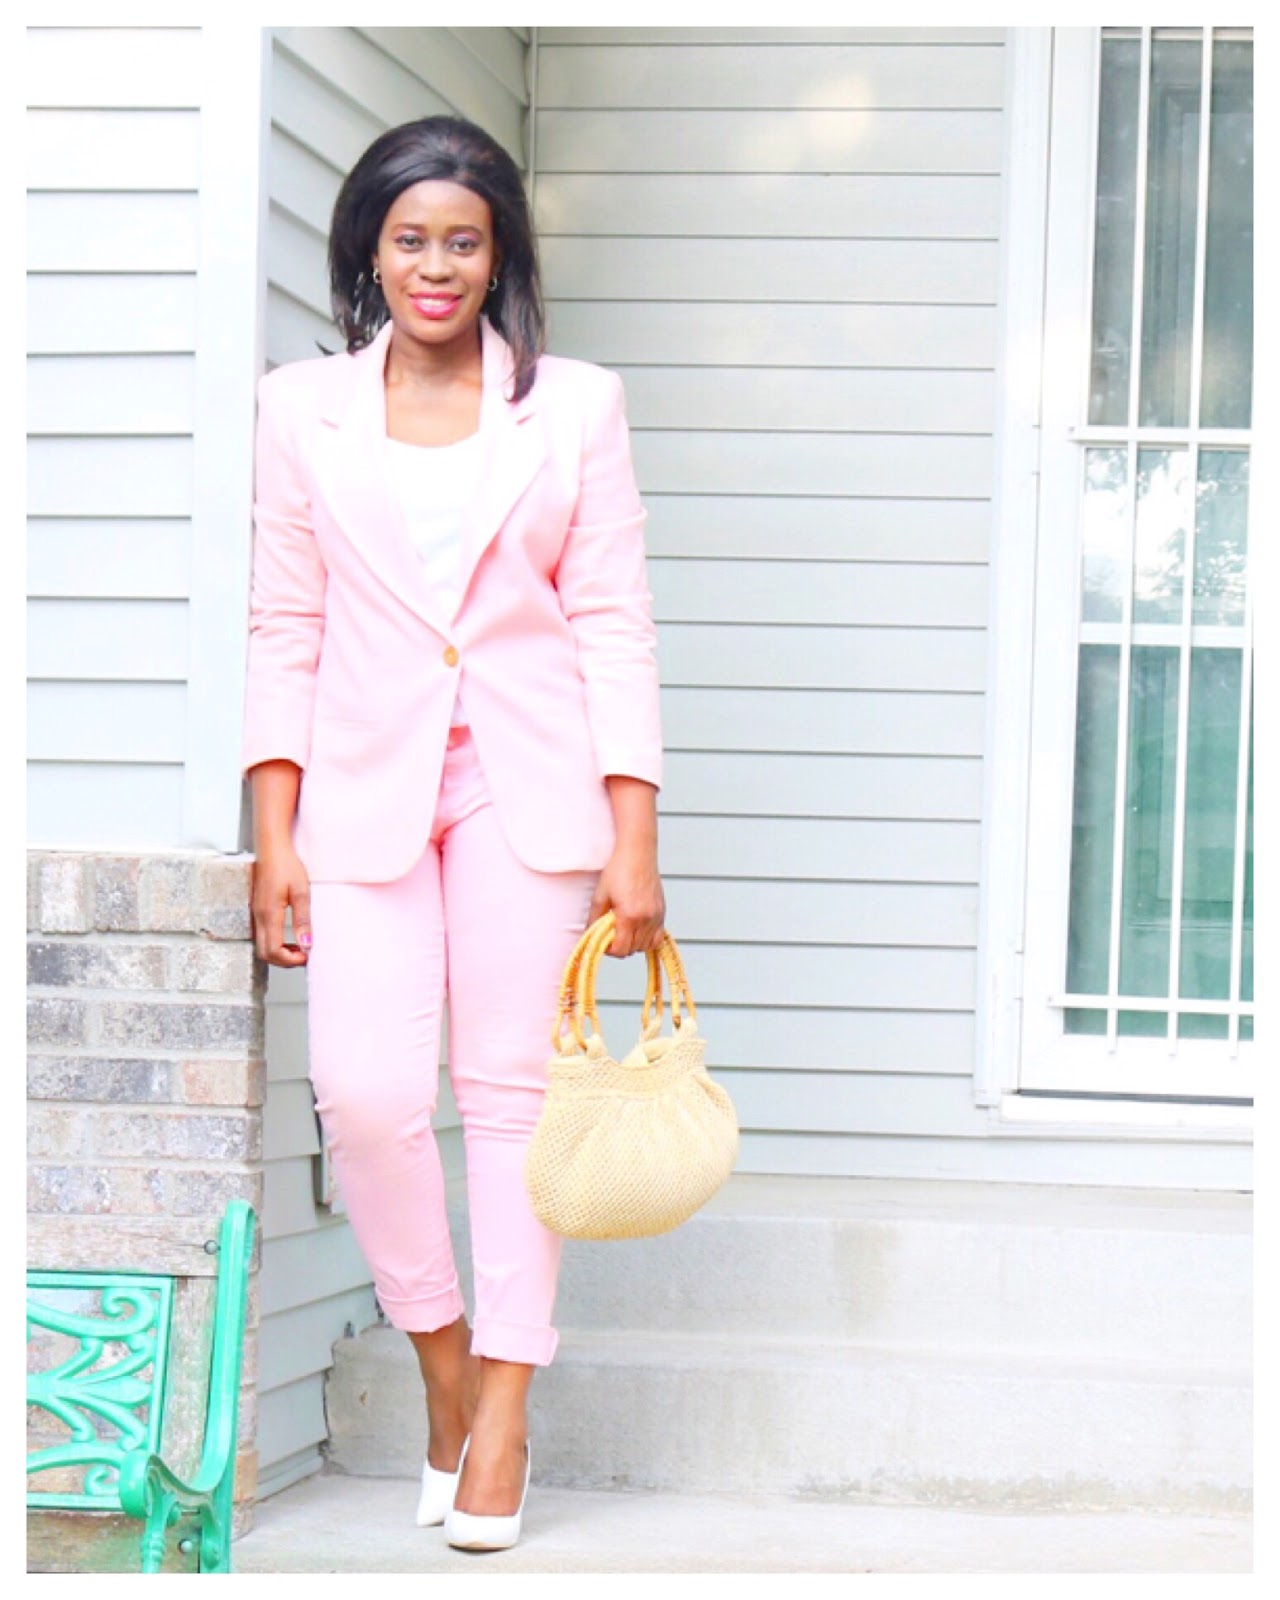 Beauty's Fashion Zone: Keeping it simple and bright: Pink pant suit ...